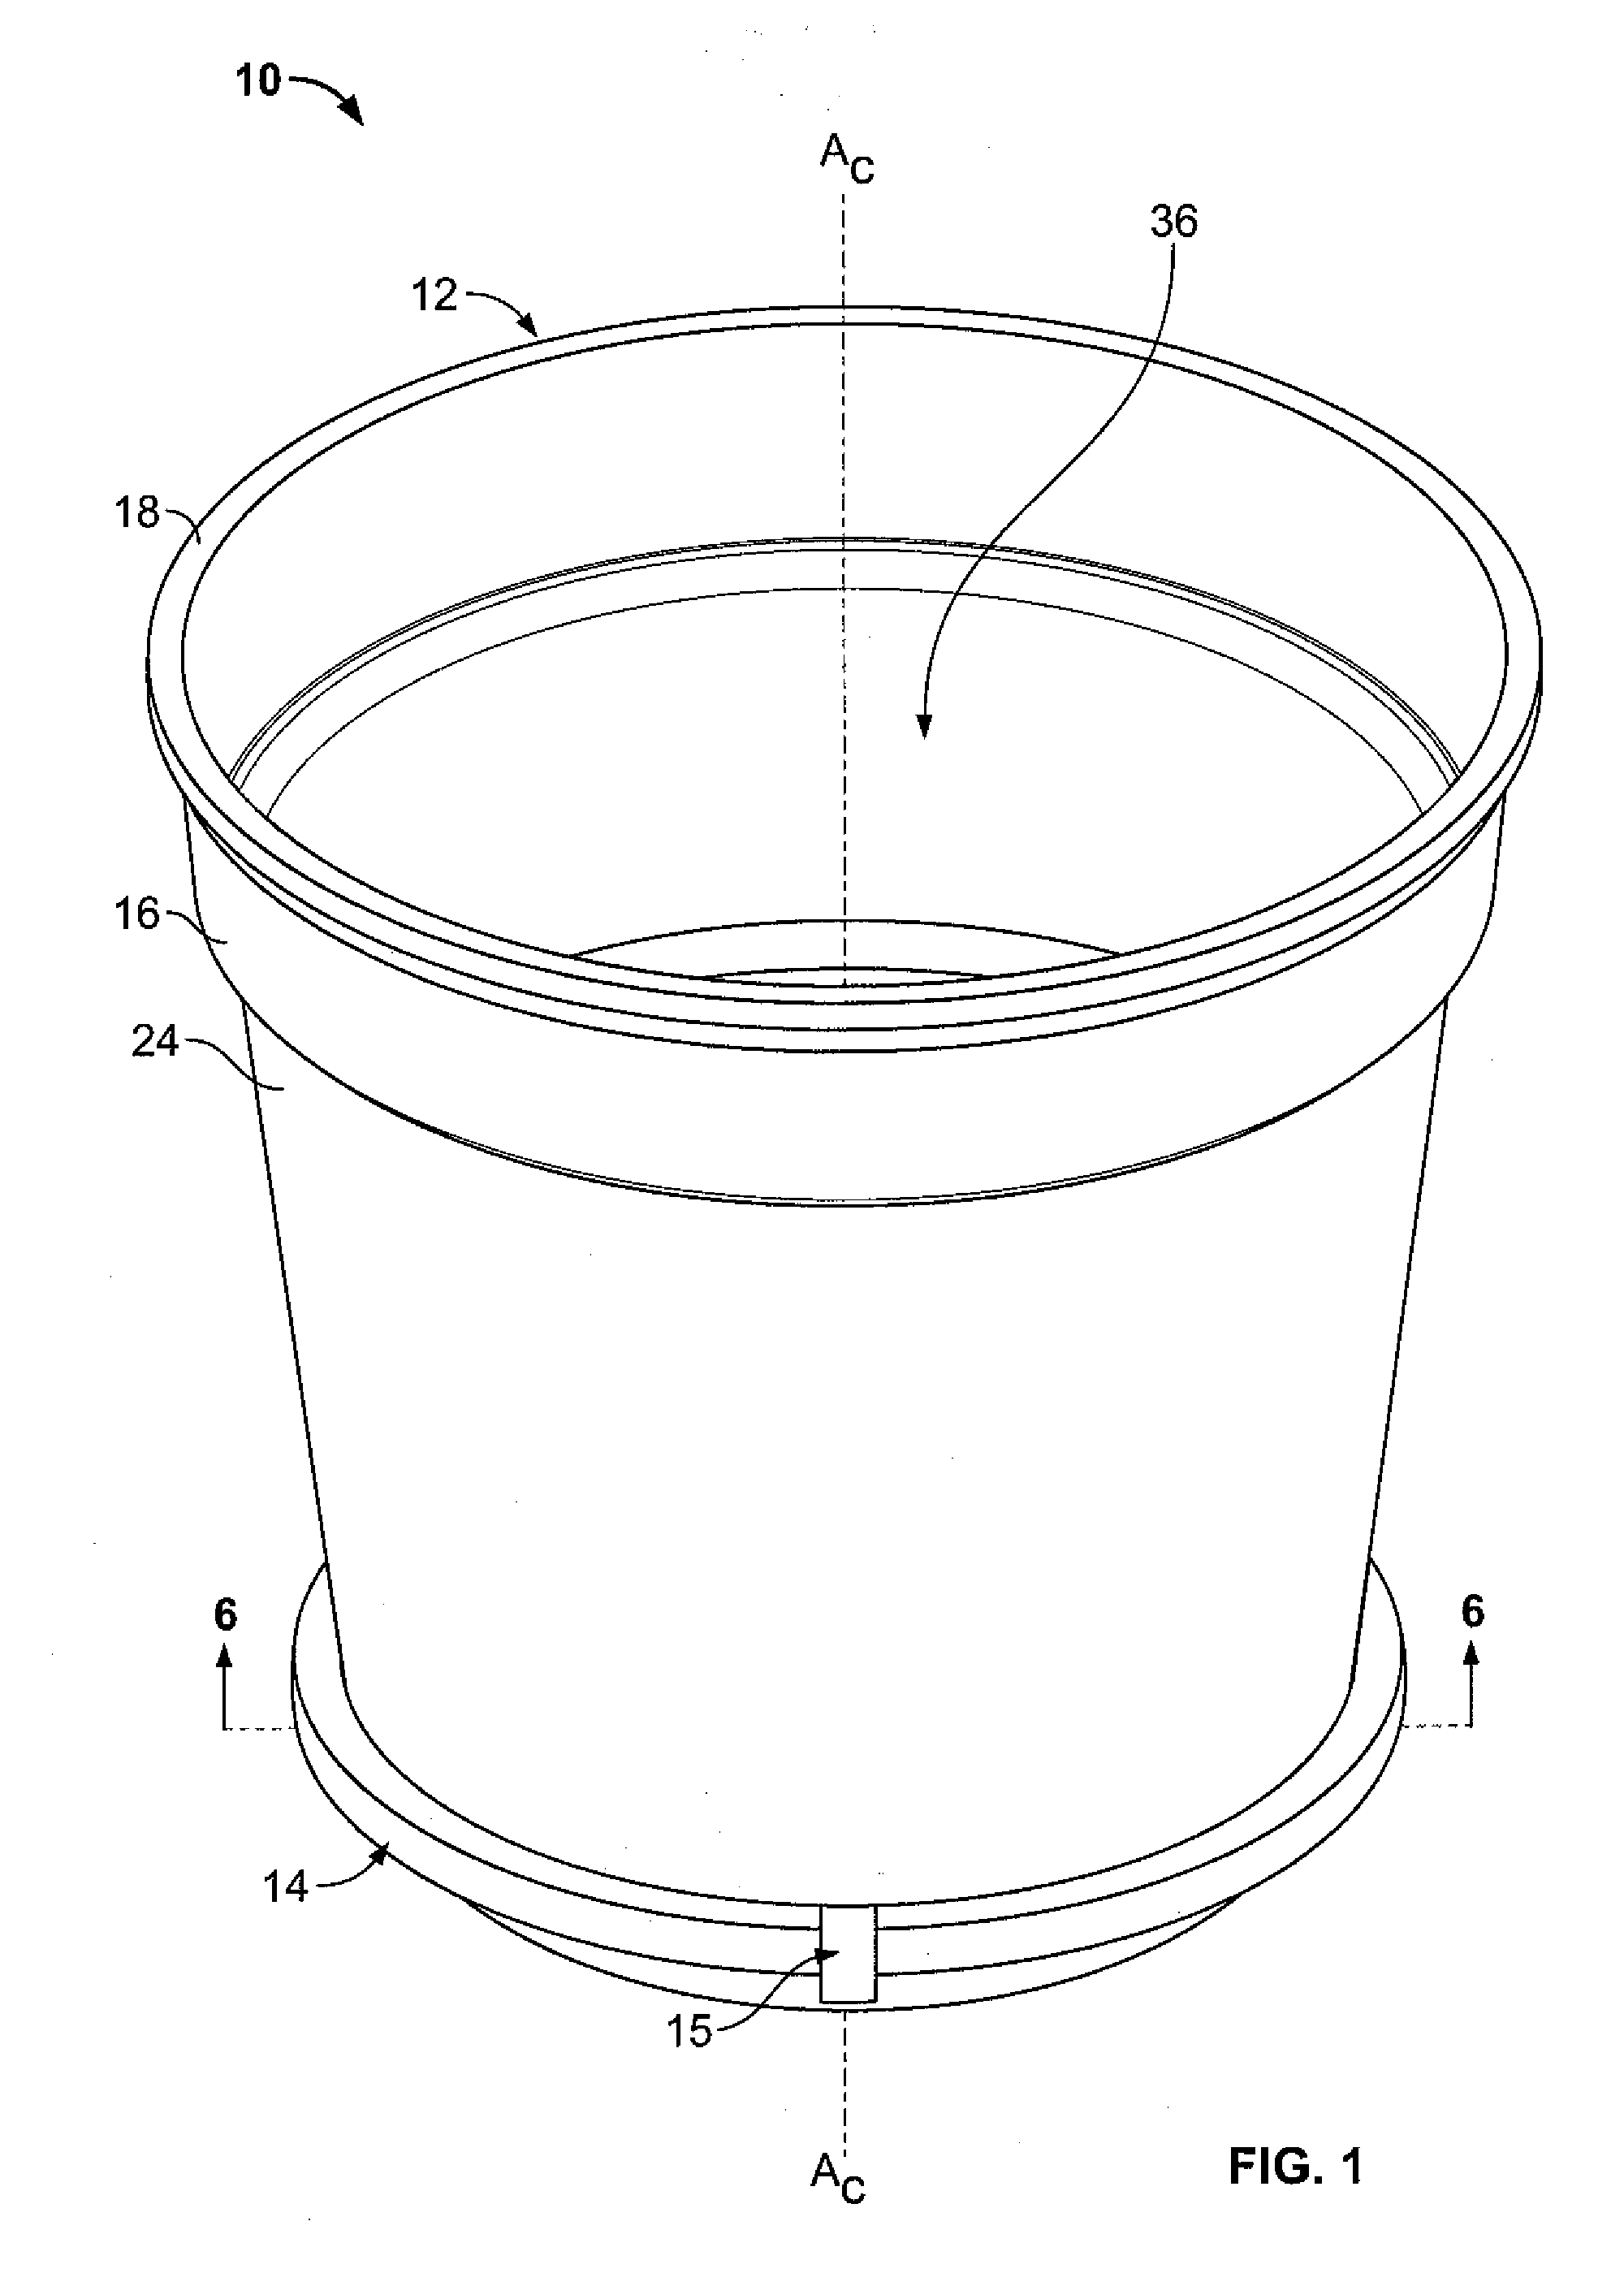 Open Bottomed Planting Pot with Releaseable Bottom Cover